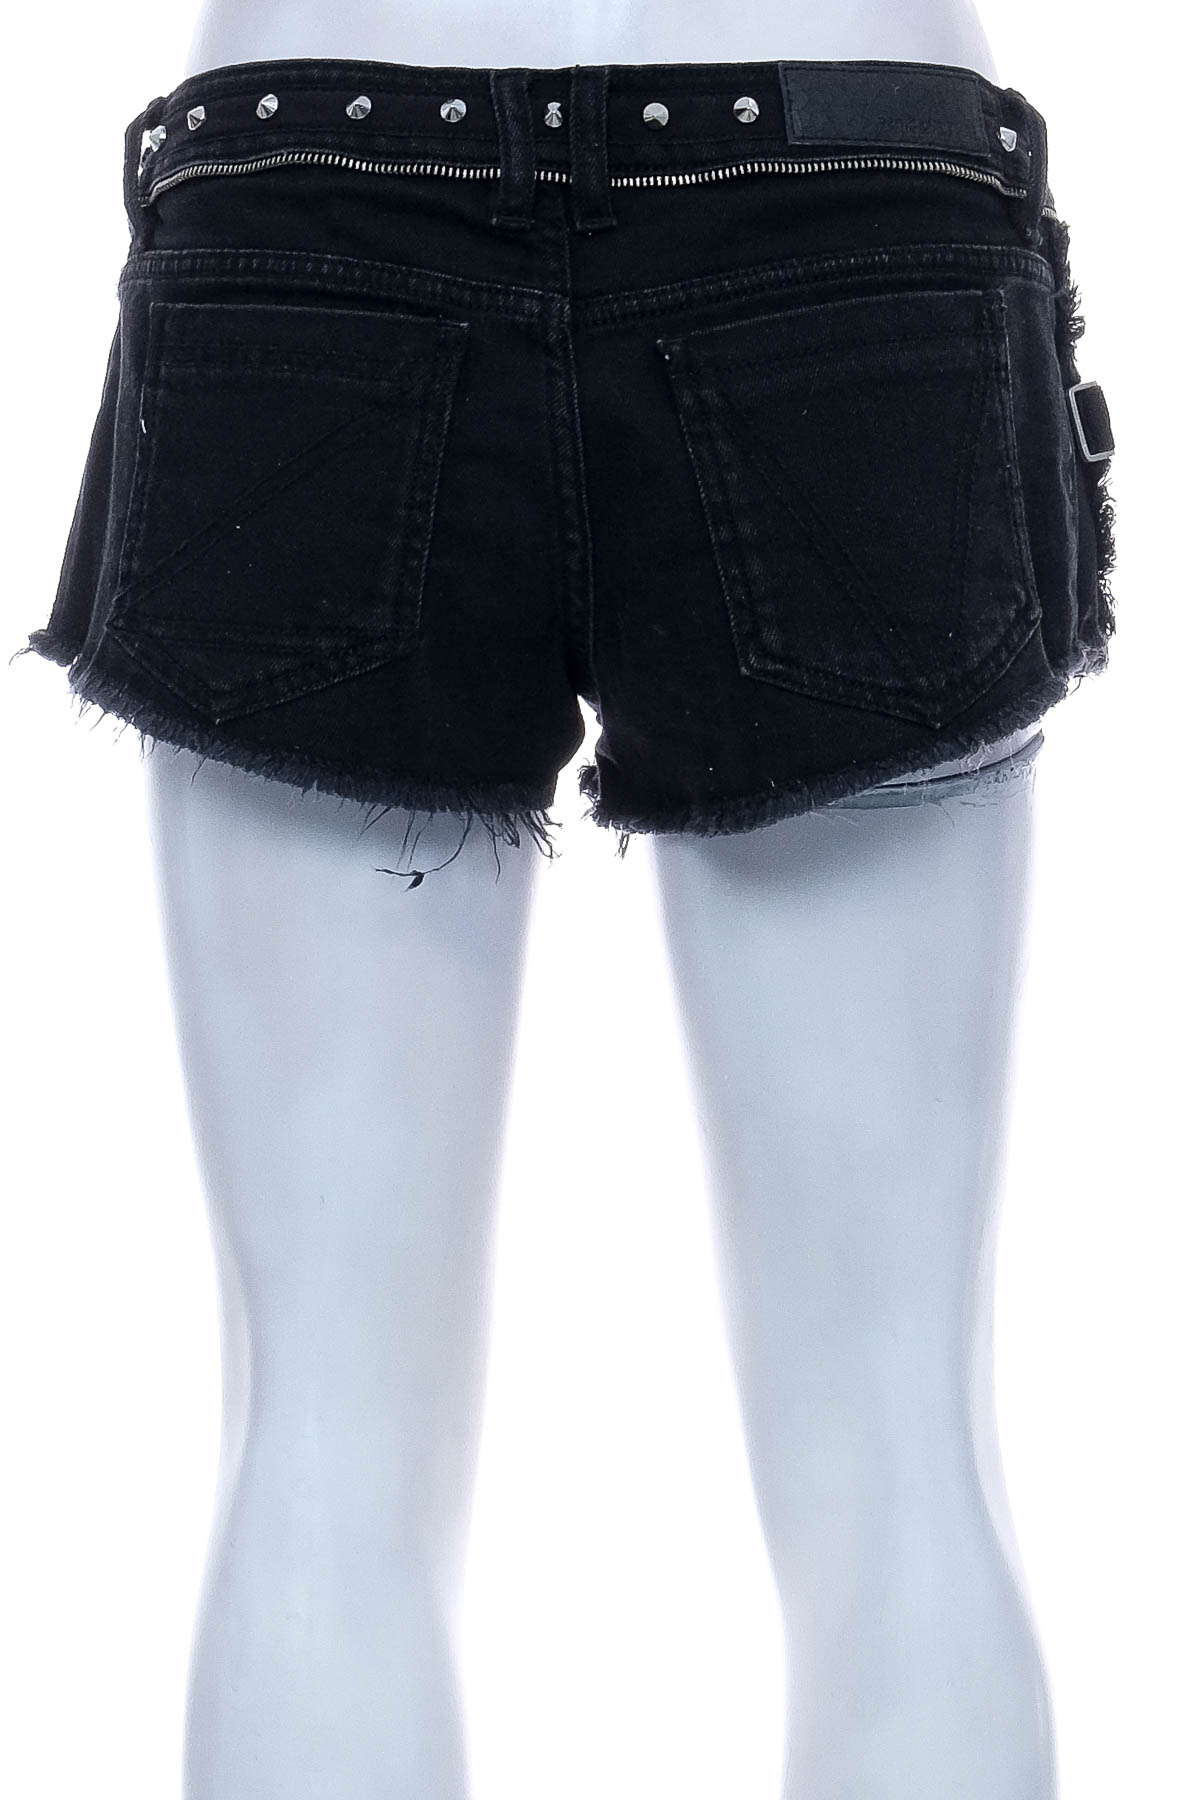 Female shorts - ZADIG & VOLTAIRE - 1